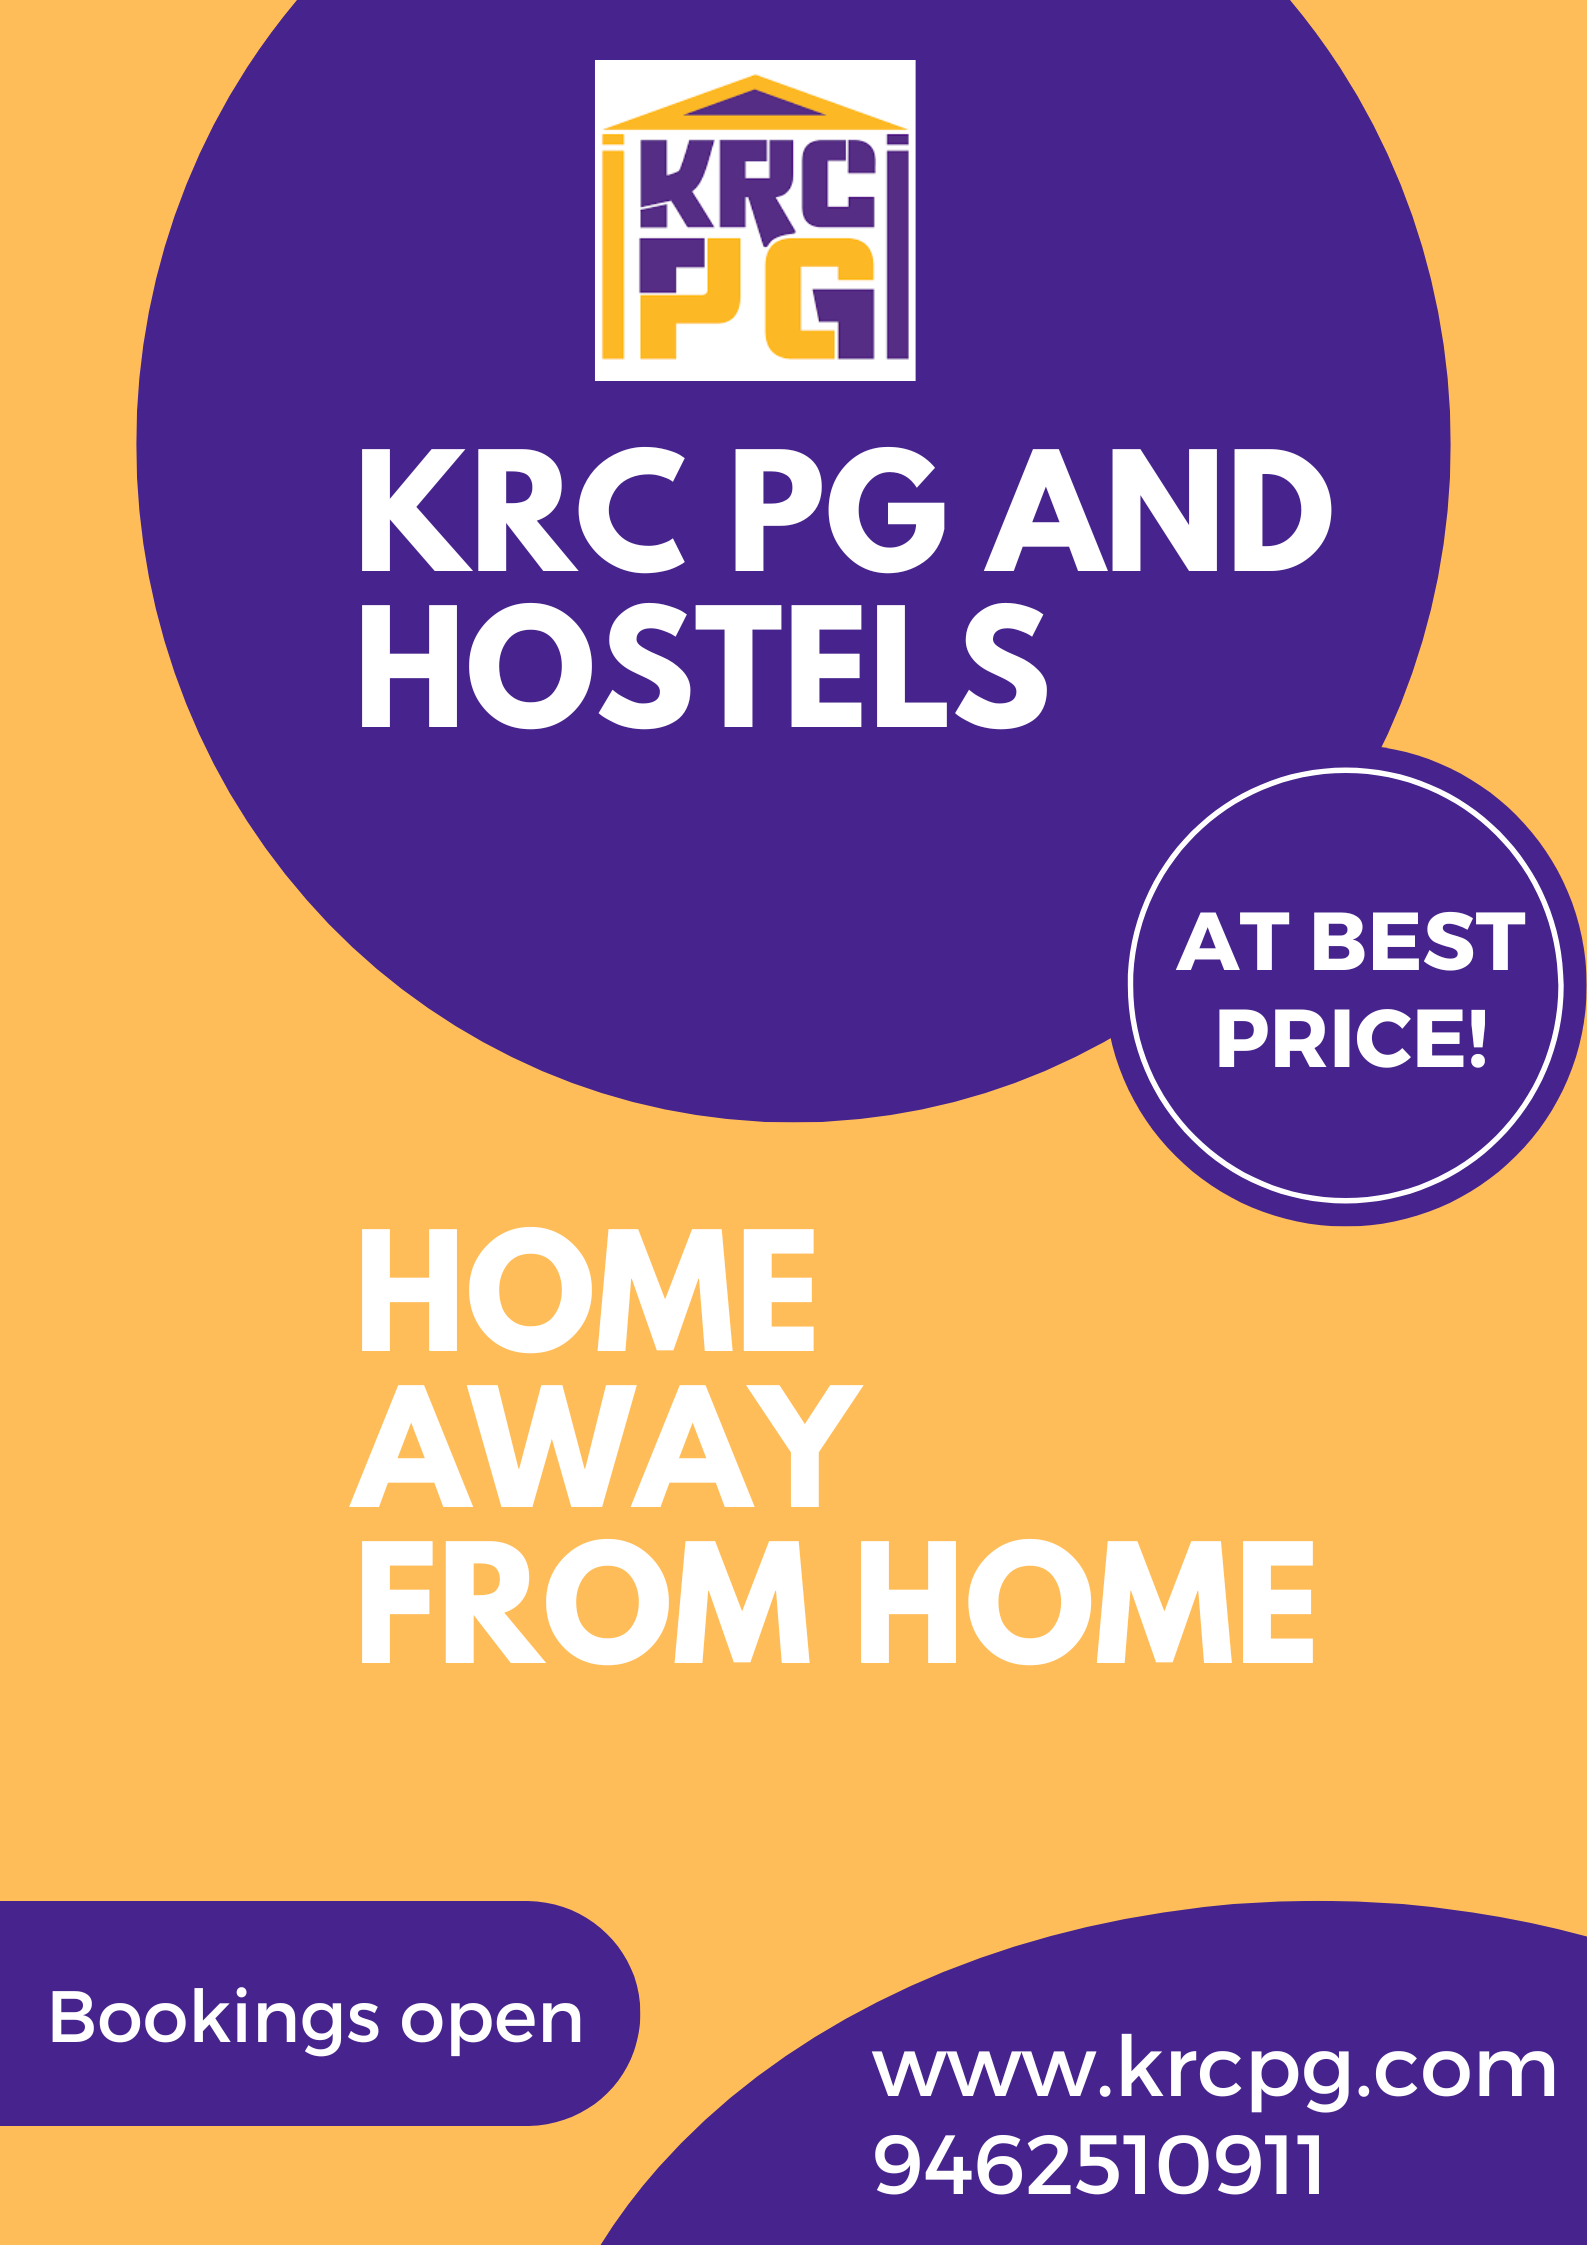 KRC PG AND HOSTELS - HOME AWAY FROM HOME